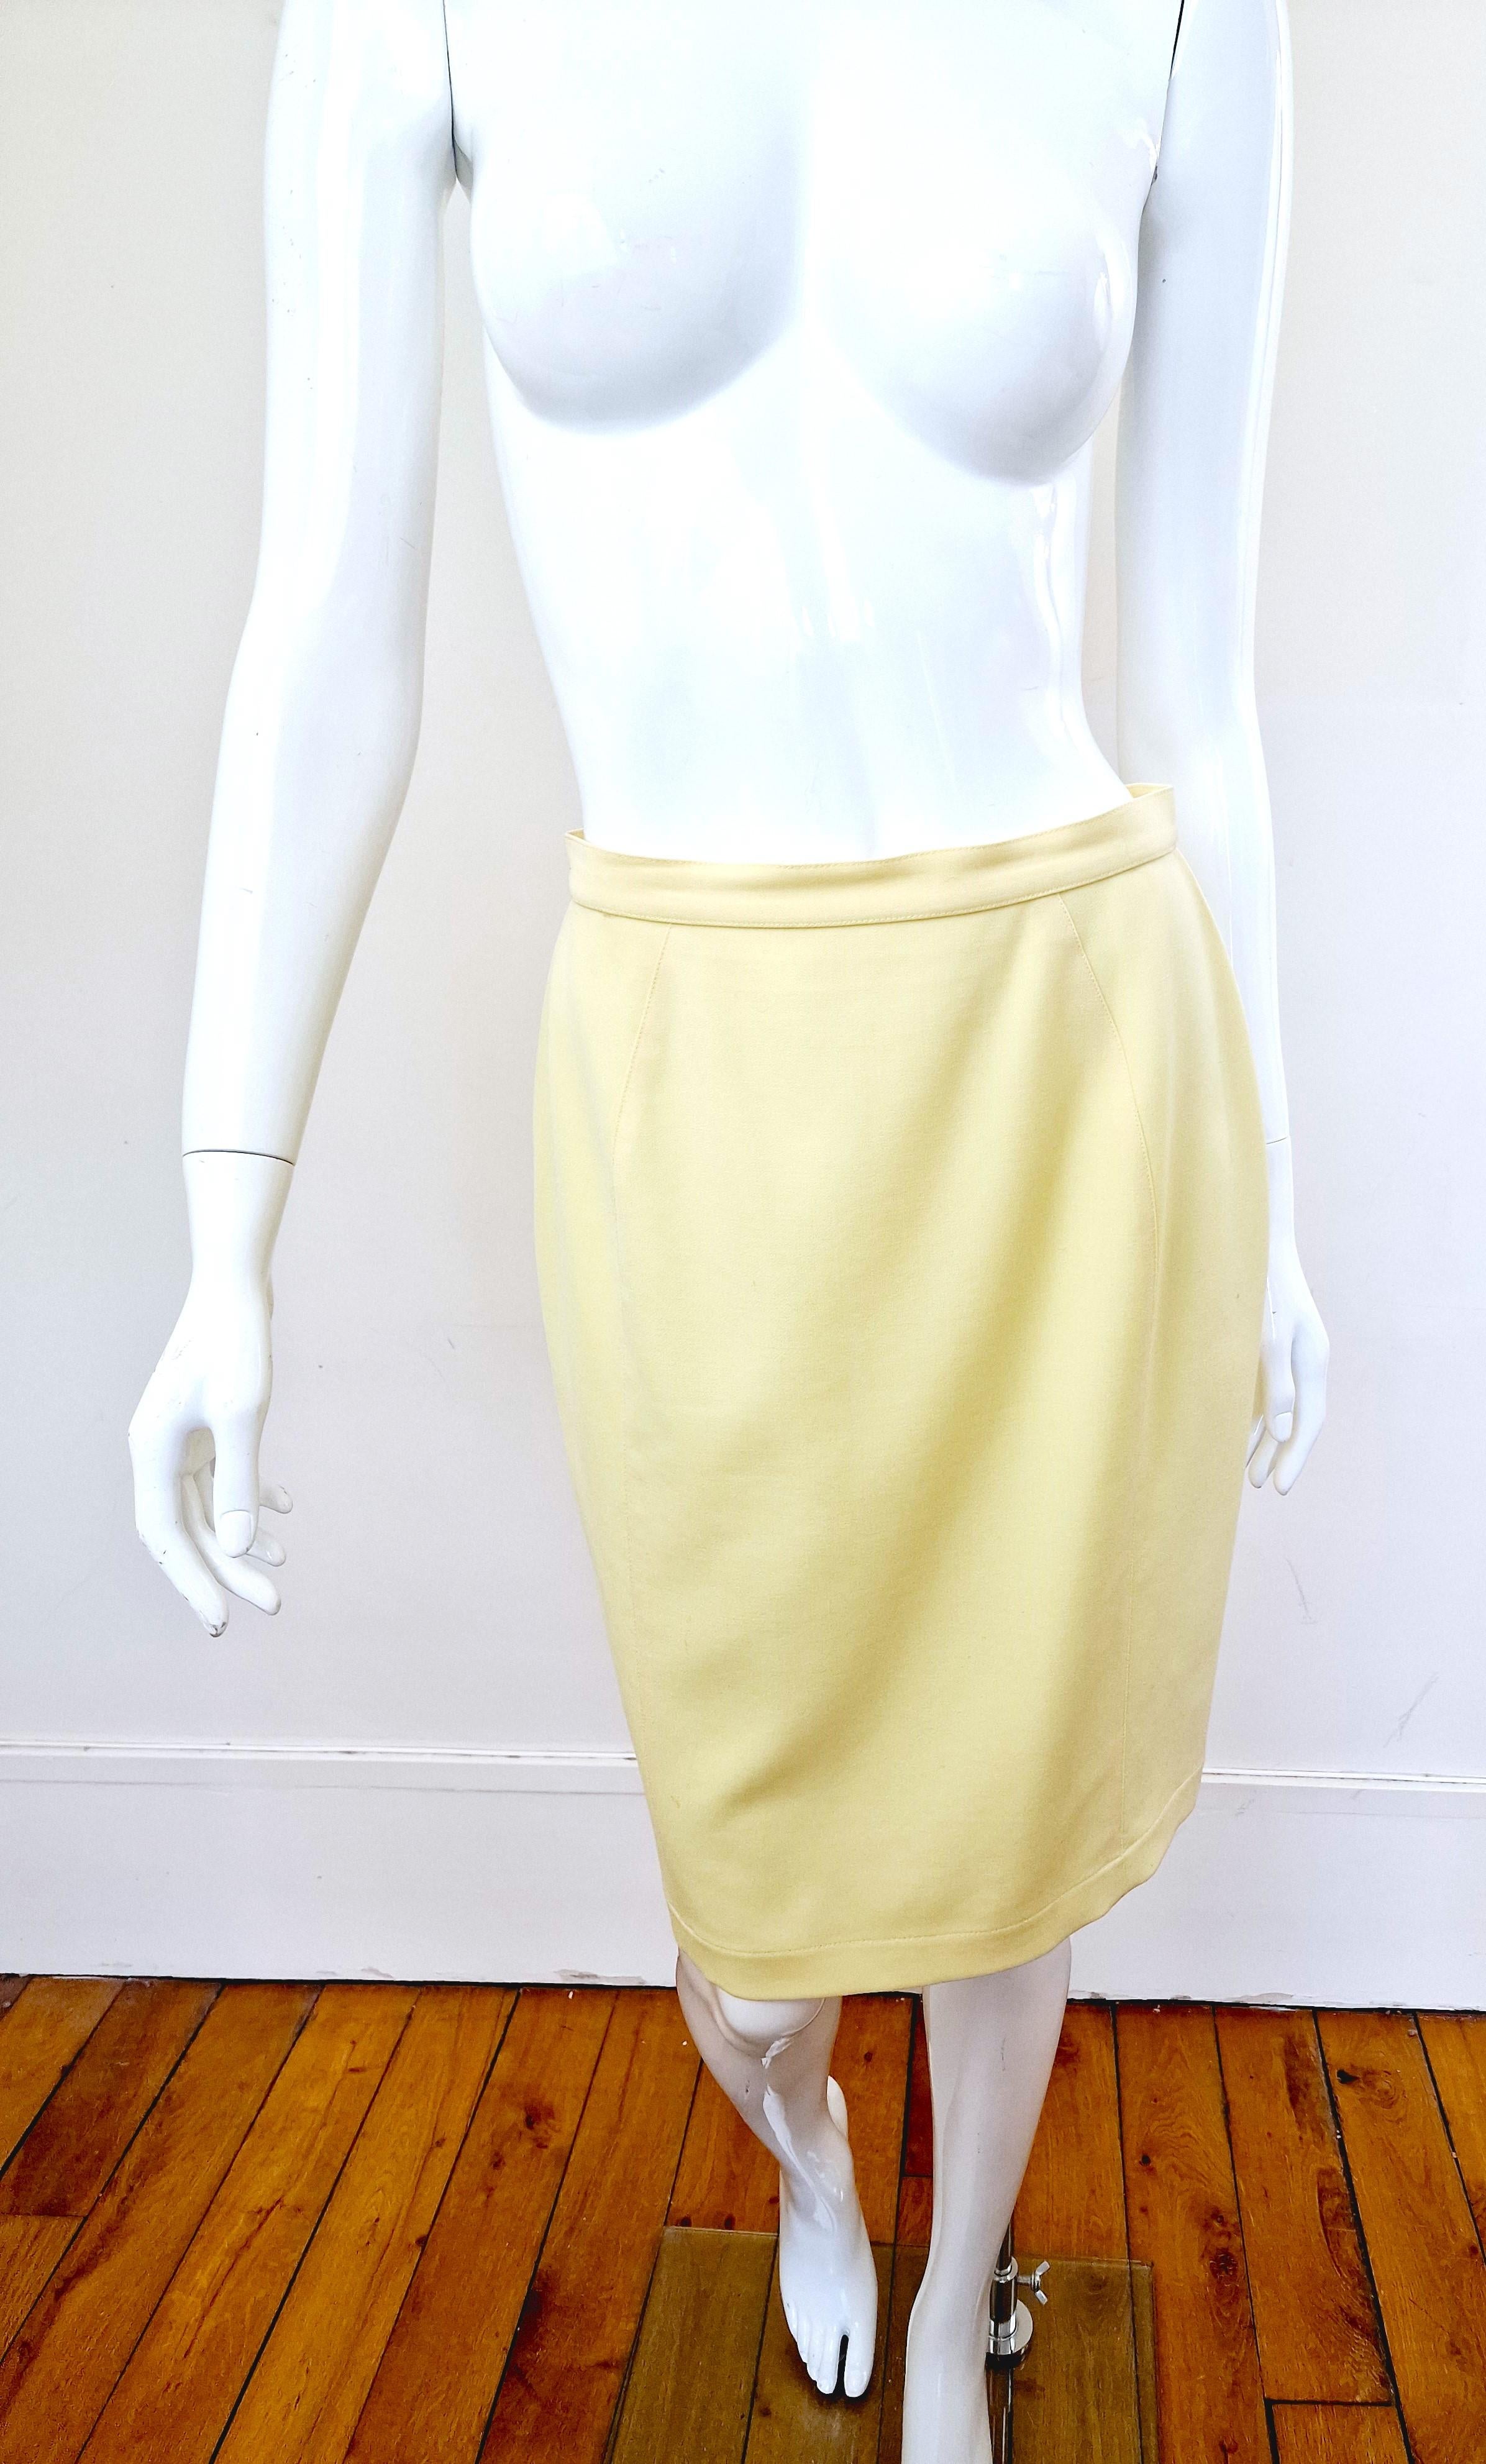  Thierry Mugler Yellow Metal Shiny Star Large Evening Vampir Couture Dress Suit  For Sale 5